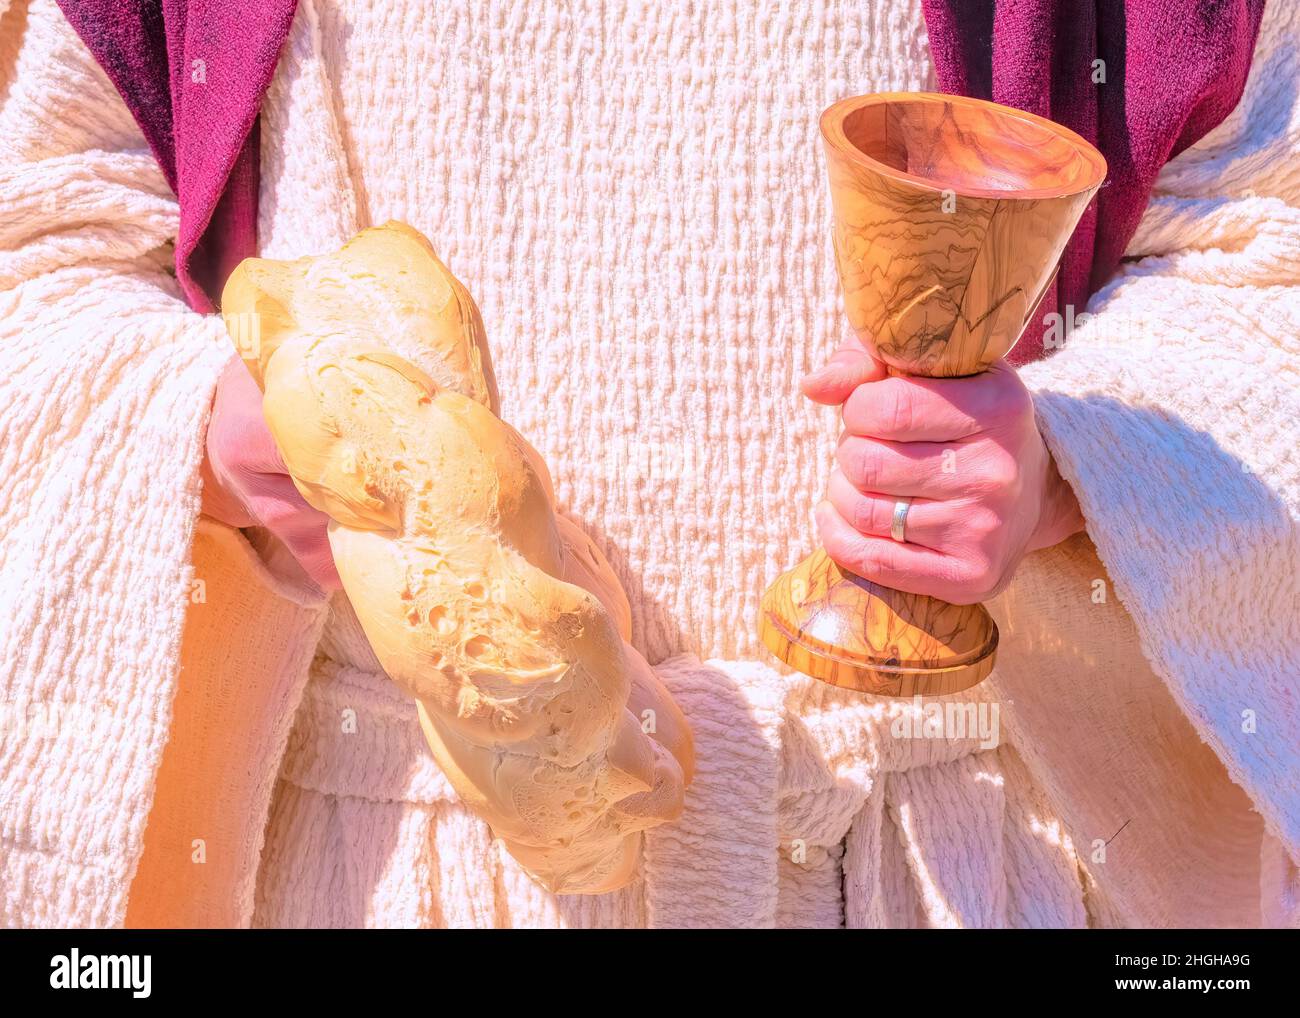 Religious symbols of bread and wine in the hands of a priest. Digital enhancement Stock Photo